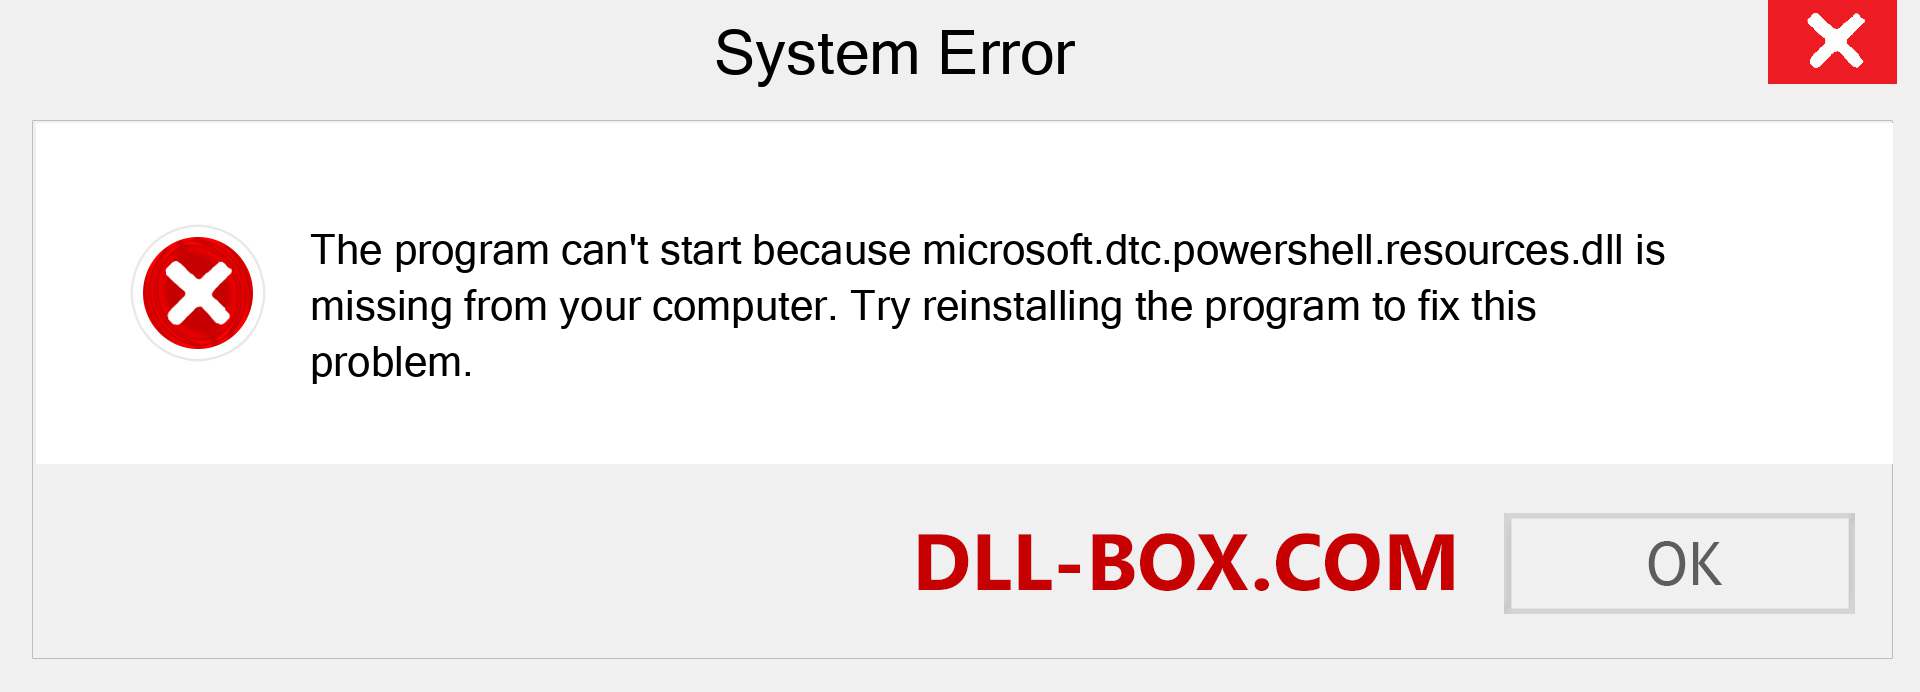  microsoft.dtc.powershell.resources.dll file is missing?. Download for Windows 7, 8, 10 - Fix  microsoft.dtc.powershell.resources dll Missing Error on Windows, photos, images